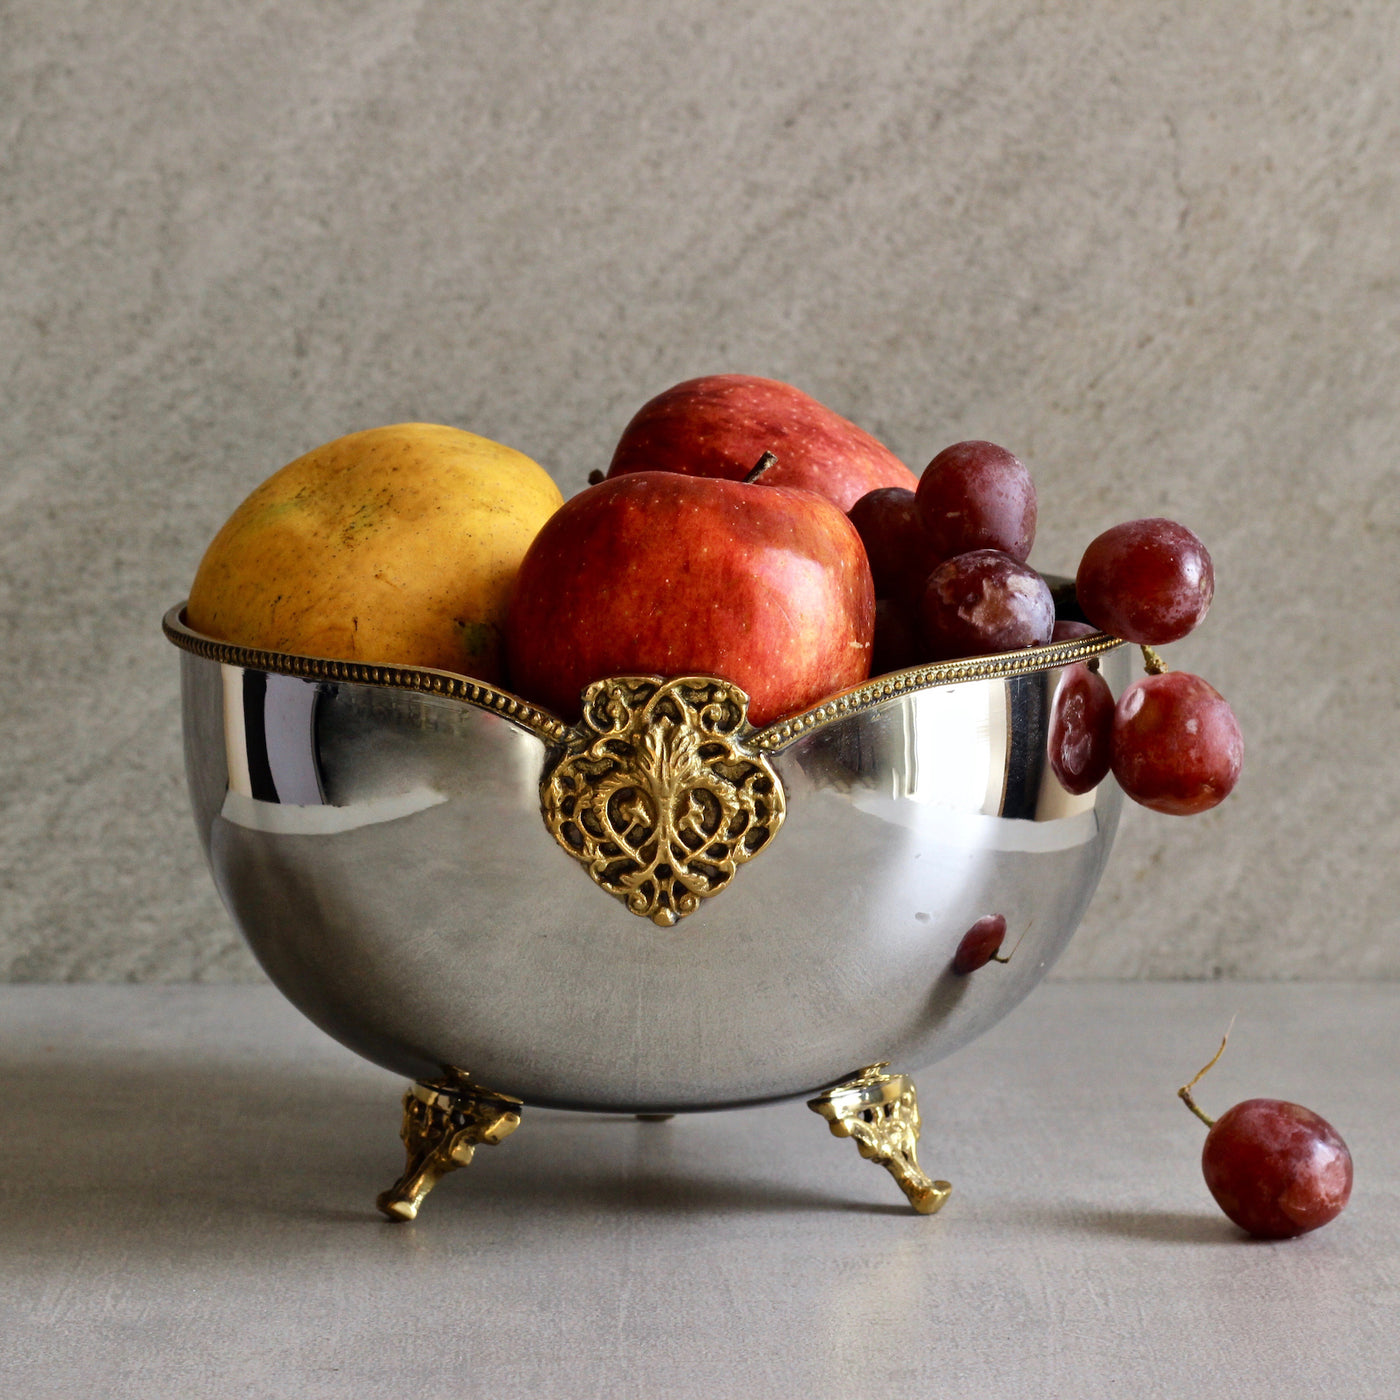 brass and steel serving bowl